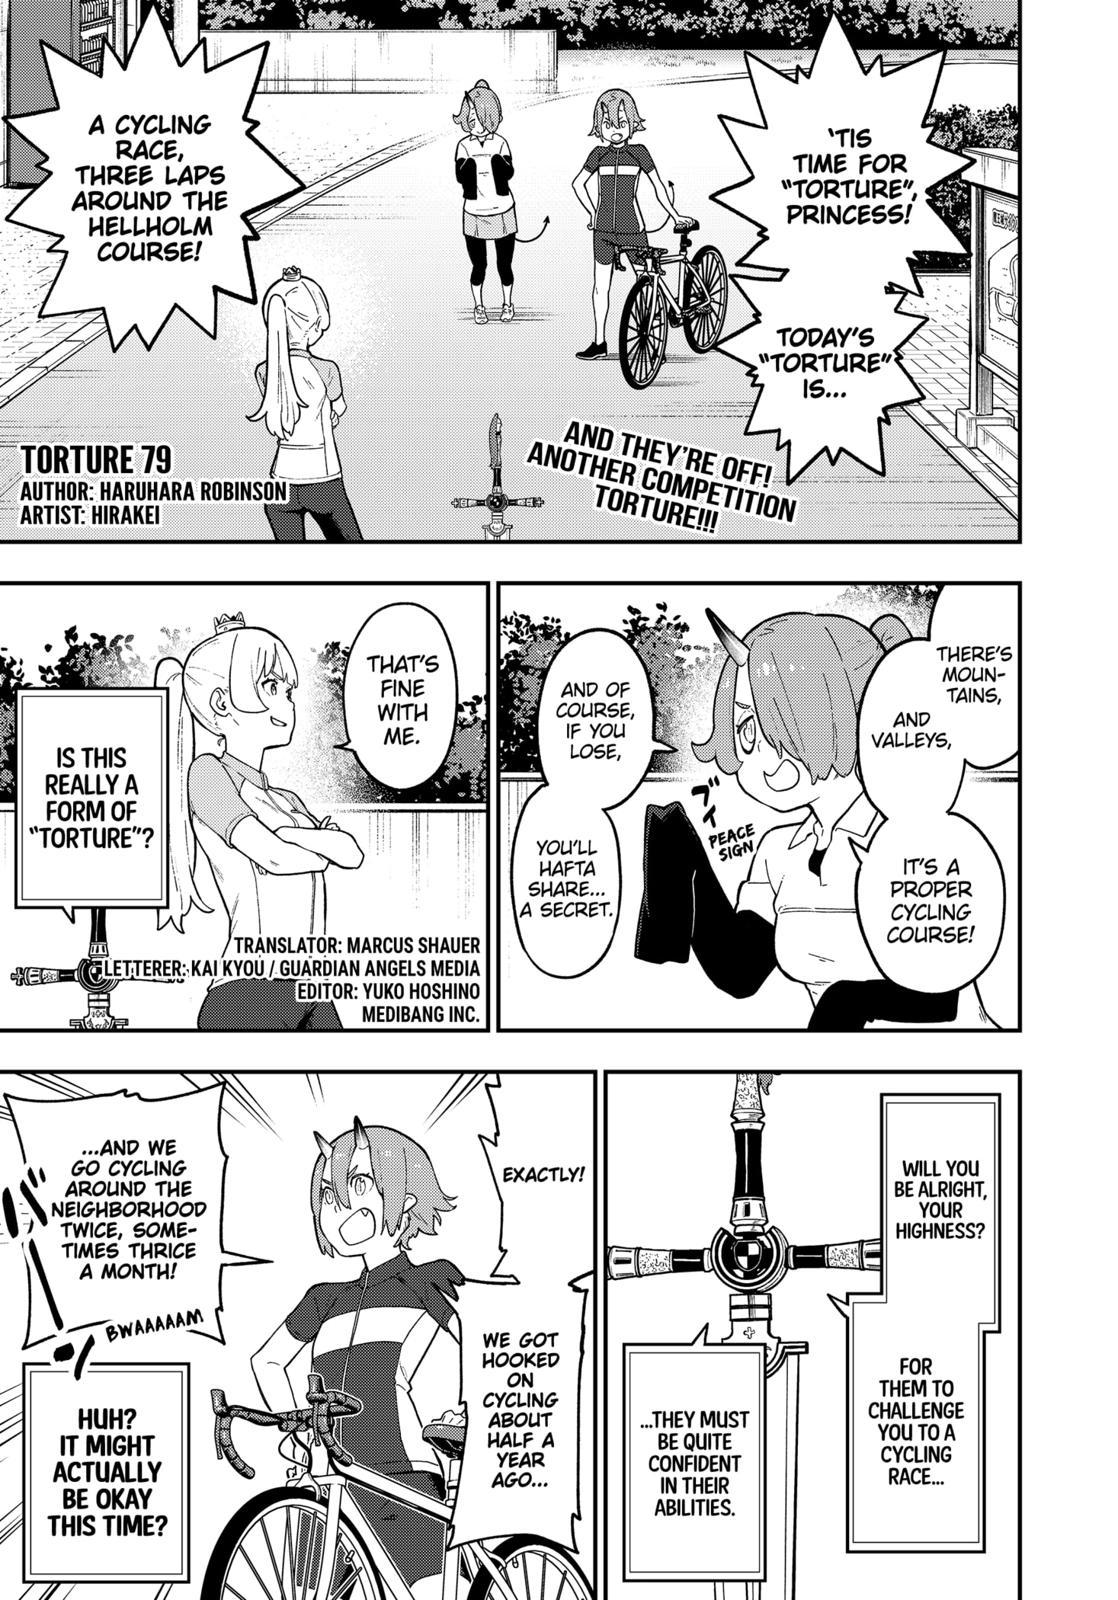 It's Time for "Interrogation", Princess! - chapter 79 - #1